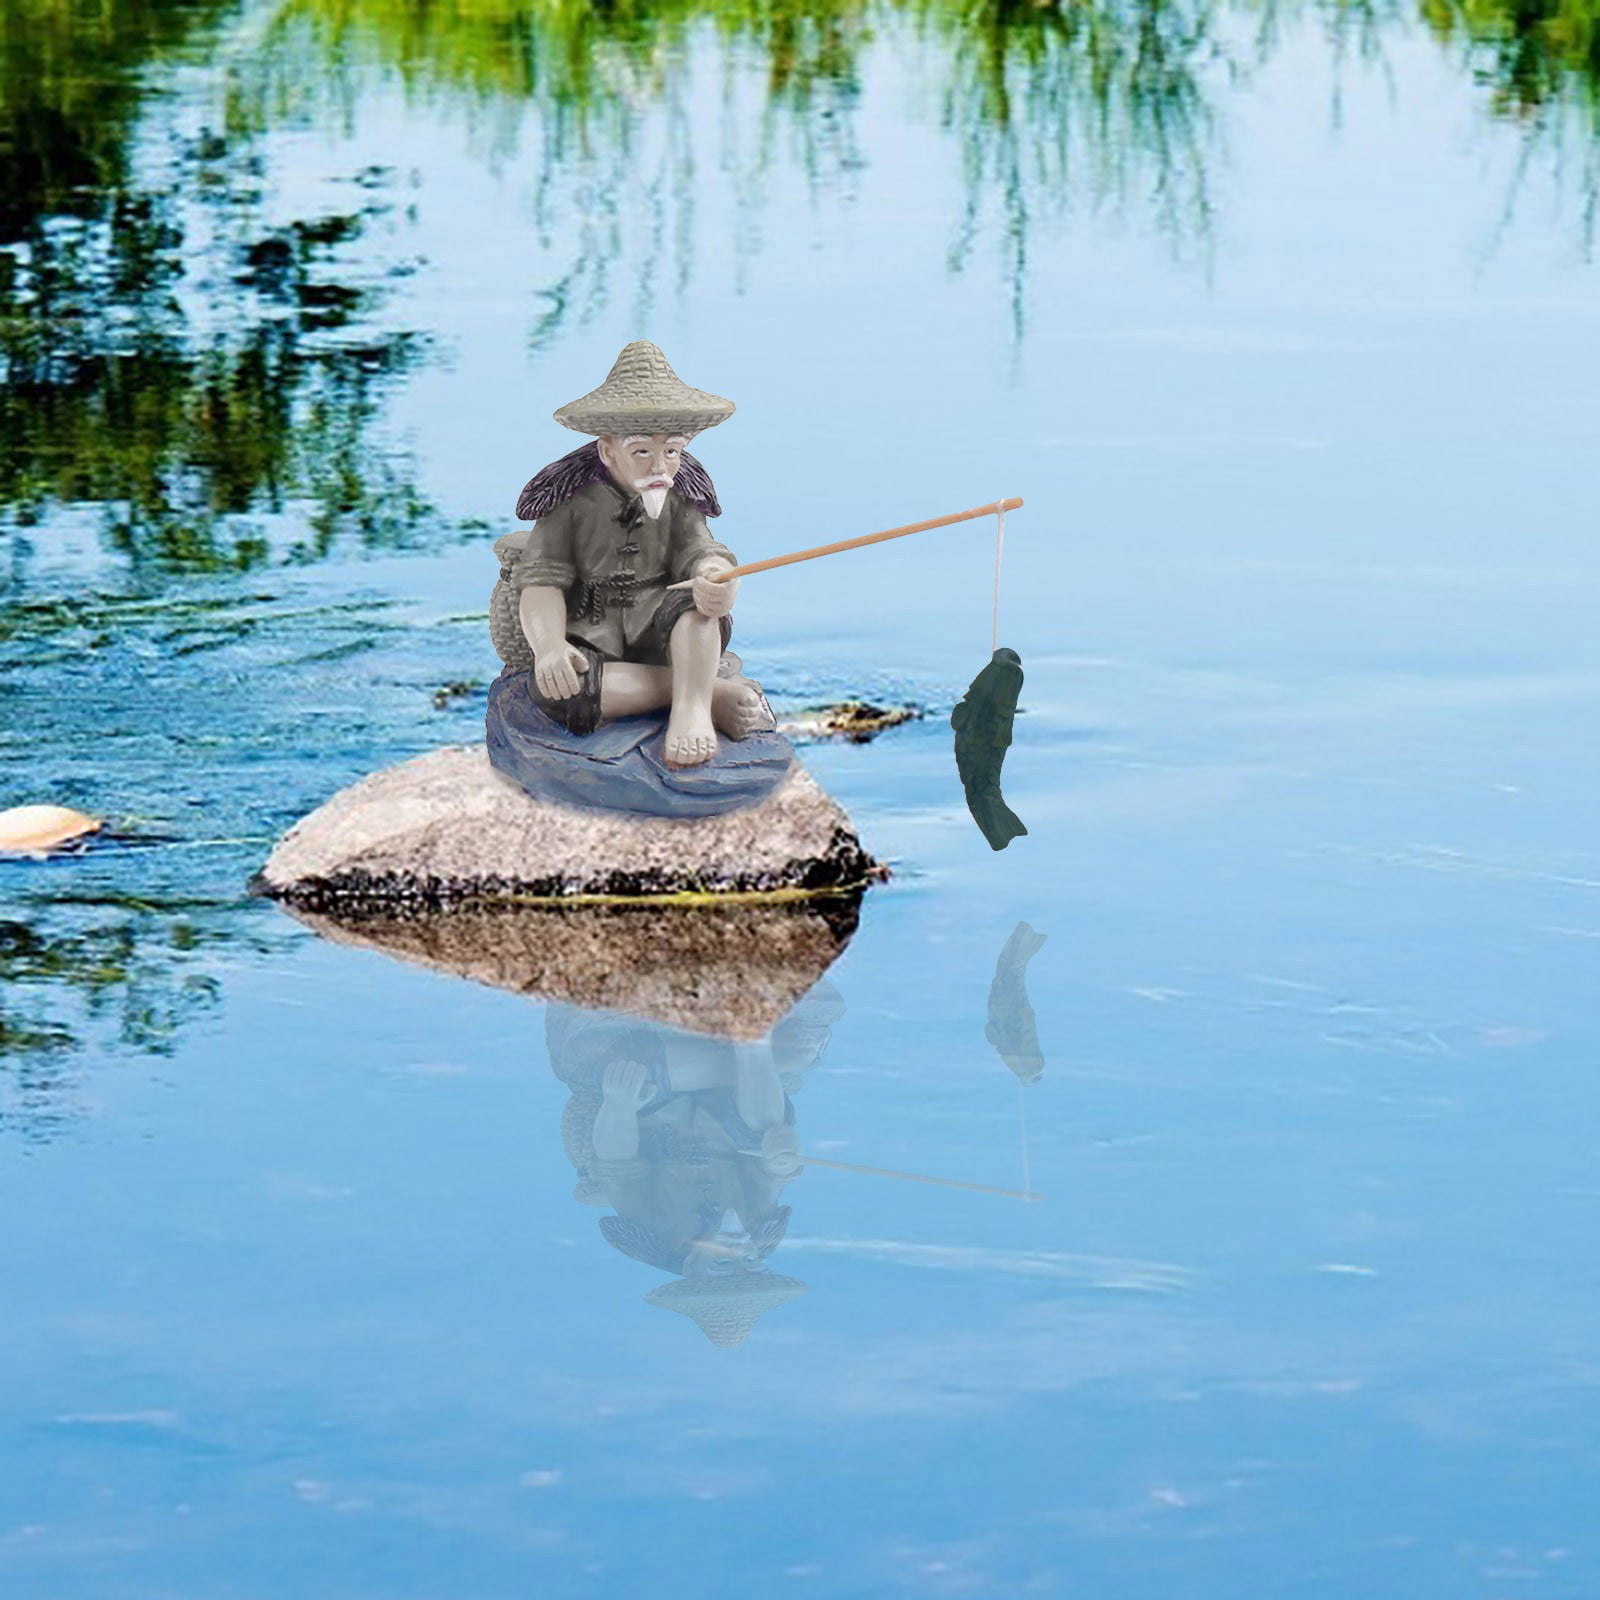 Resin Statues Of An Old Man Fishing Garden Decorations For A